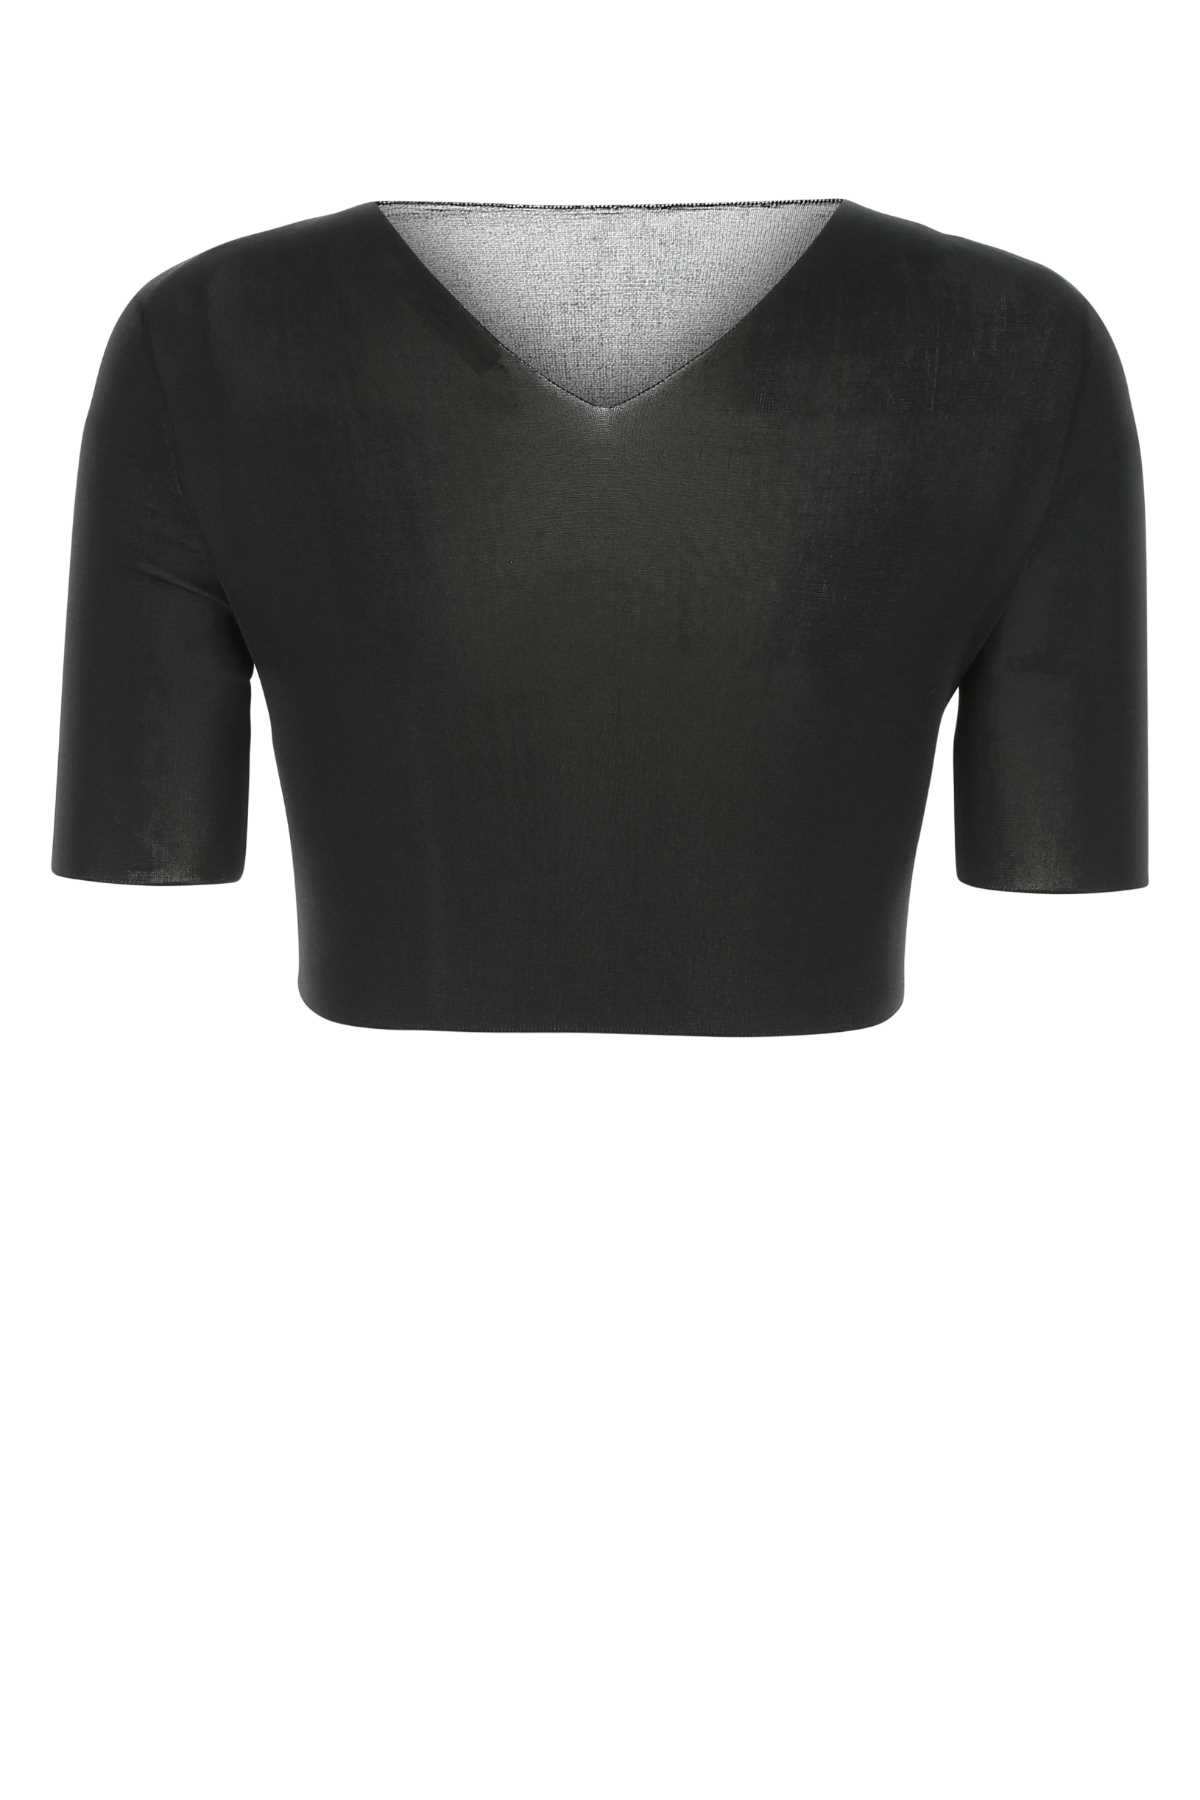 The Row Black Polyester Top In Blk